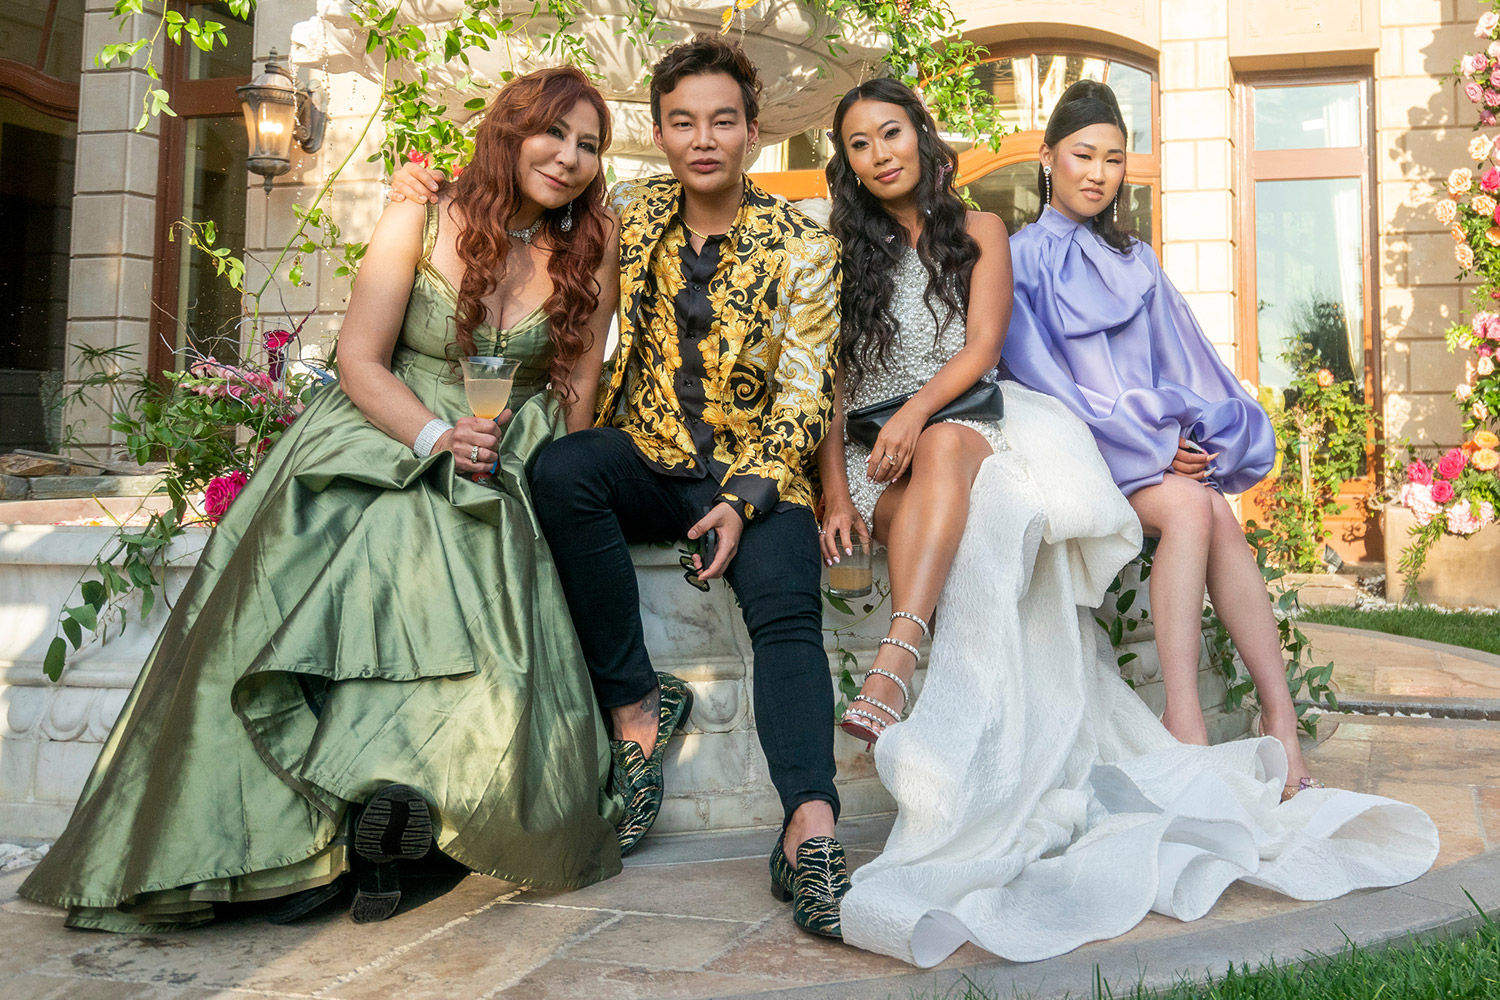 Old and New, Meet the Cast Members of 'Bling Empire' Season 2